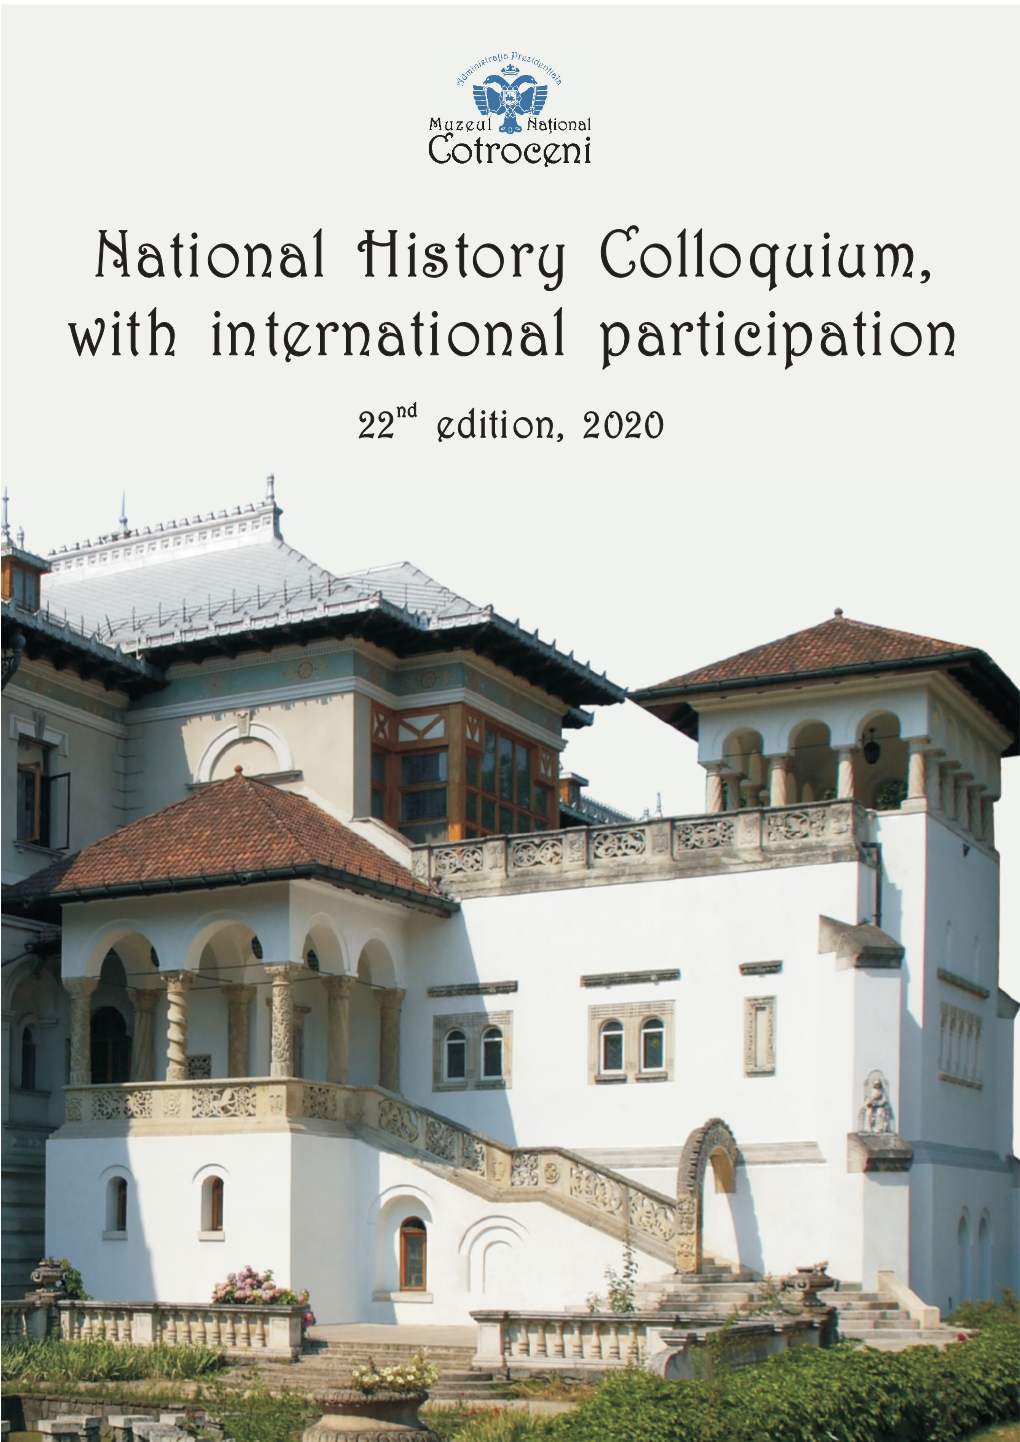 National History Colloquium, with International Participation 22Nd Edition, 2020 COTROCENI NATIONAL MUSEUM